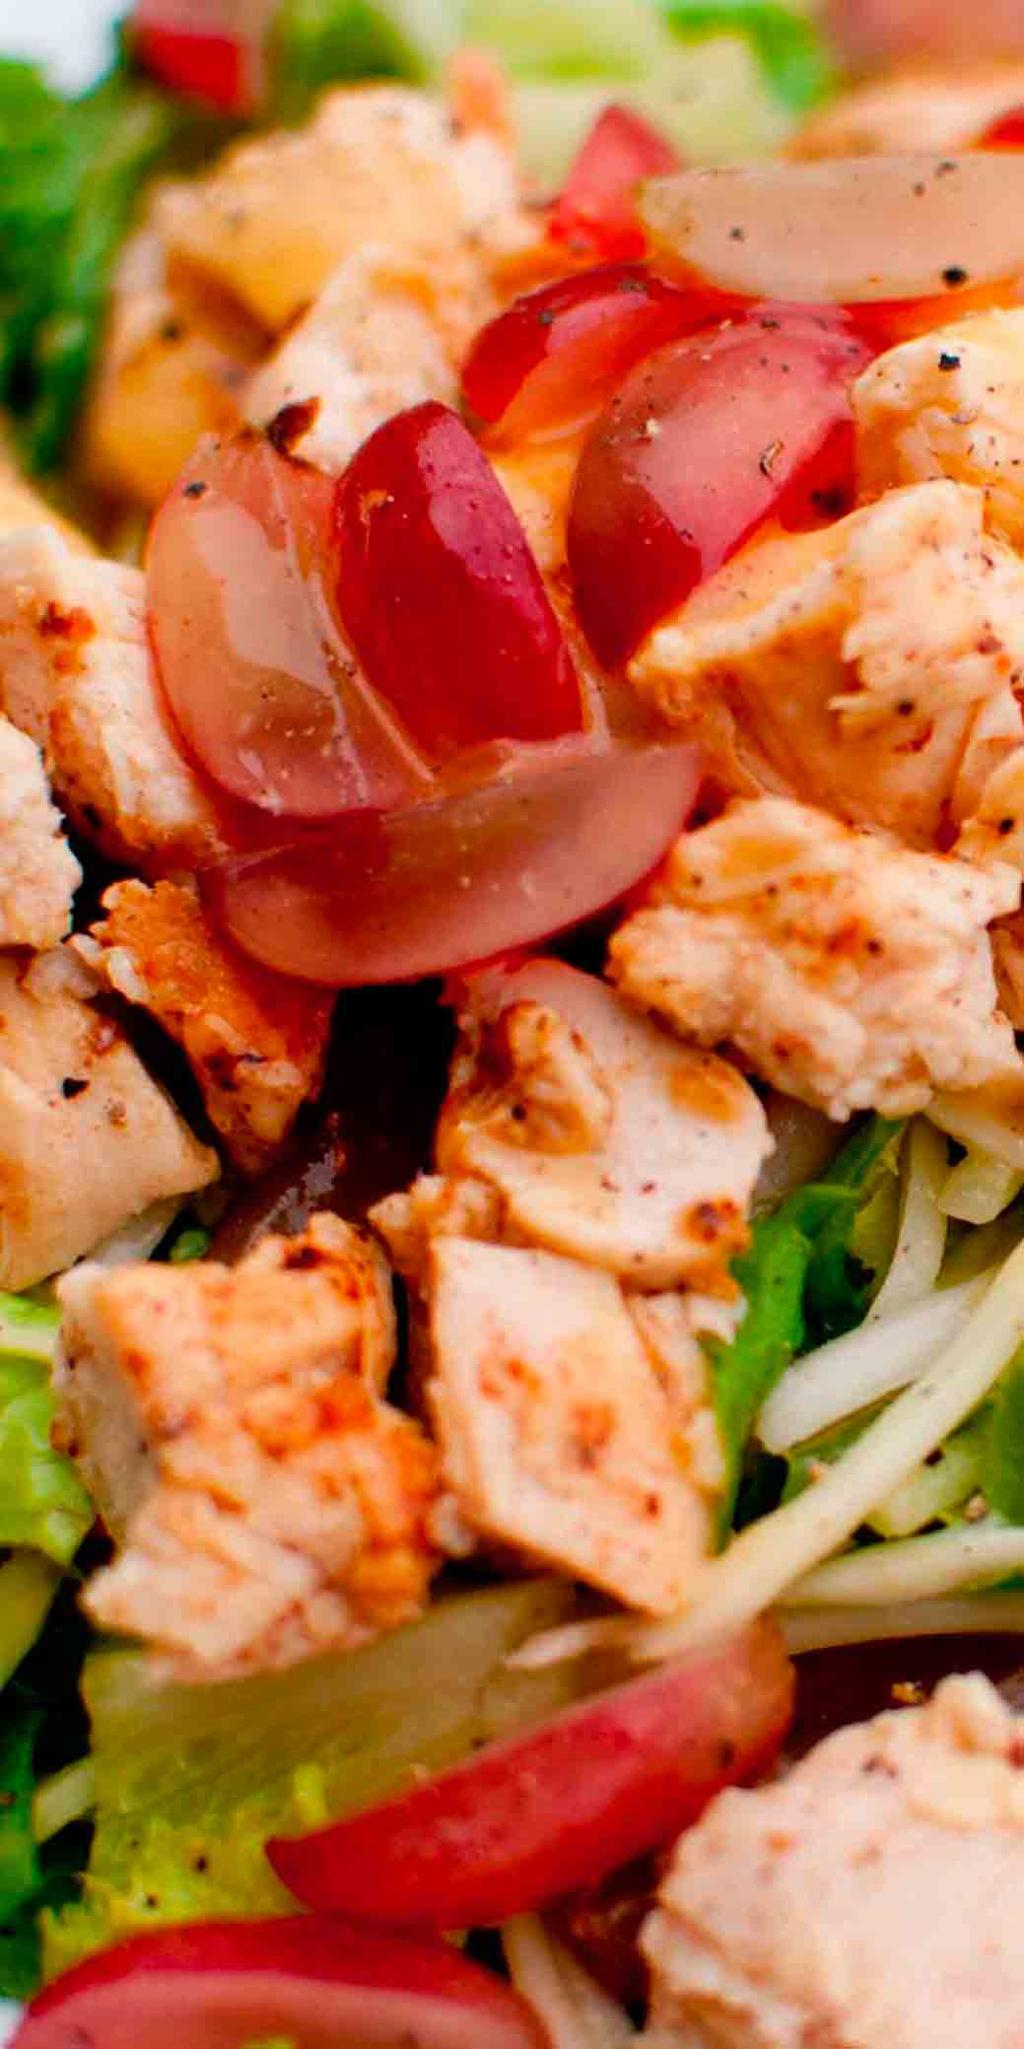 CHICKEN SALAD 100g chicken breast 1 medium pear, thinly sliced 30g shaved parmesan 2 cups salad leaves, washed 1 cup cherry tomatoes, halved 1 tablespoon balsamic vinegar 1 tablespoon olive oil Salt